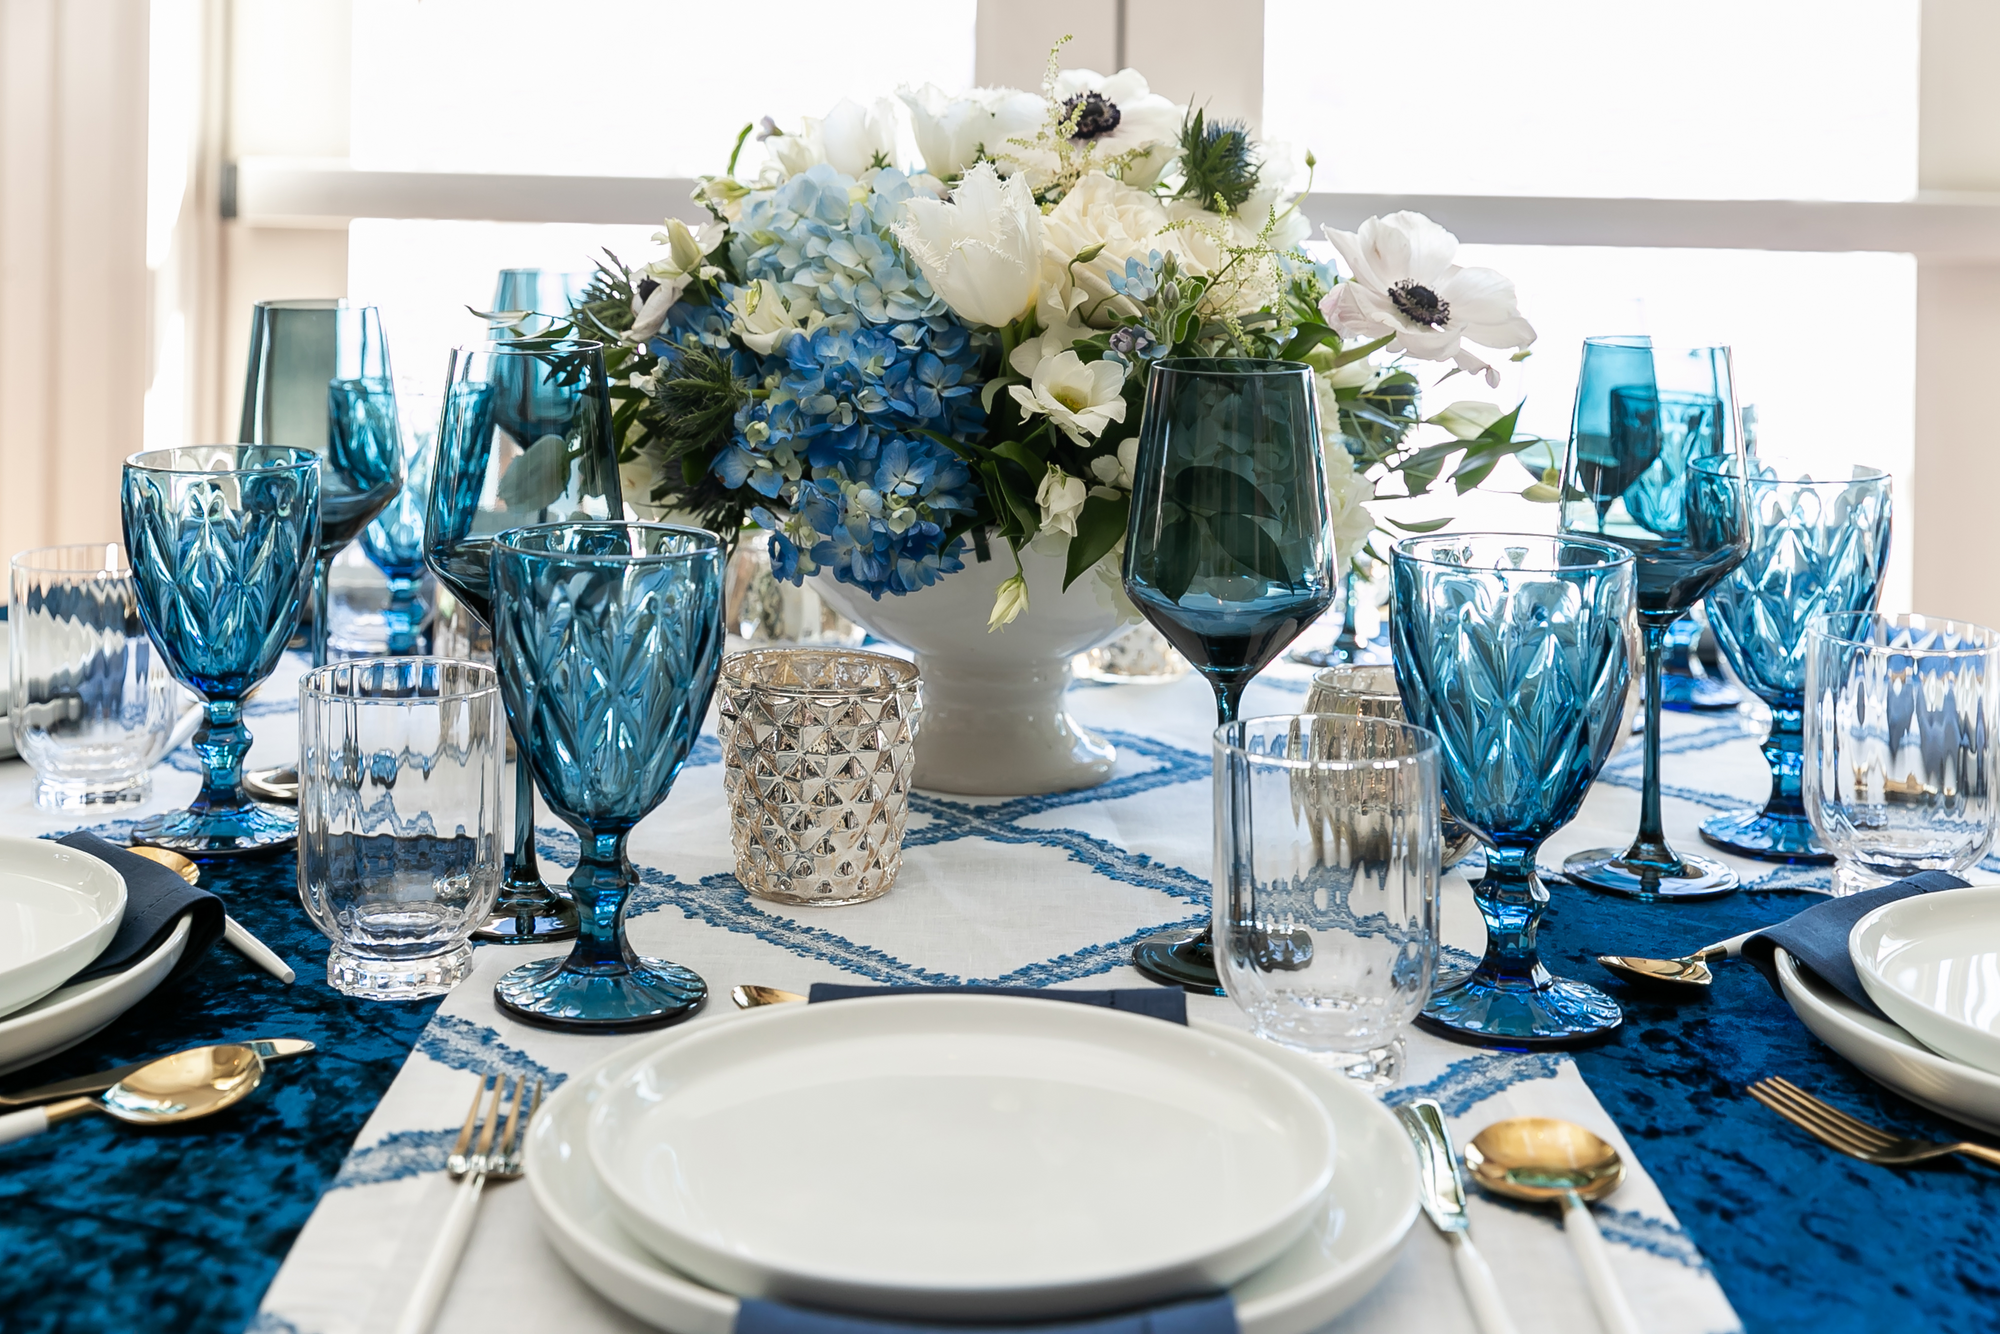 Blue wine glasses and blue goblets set on a wedding table